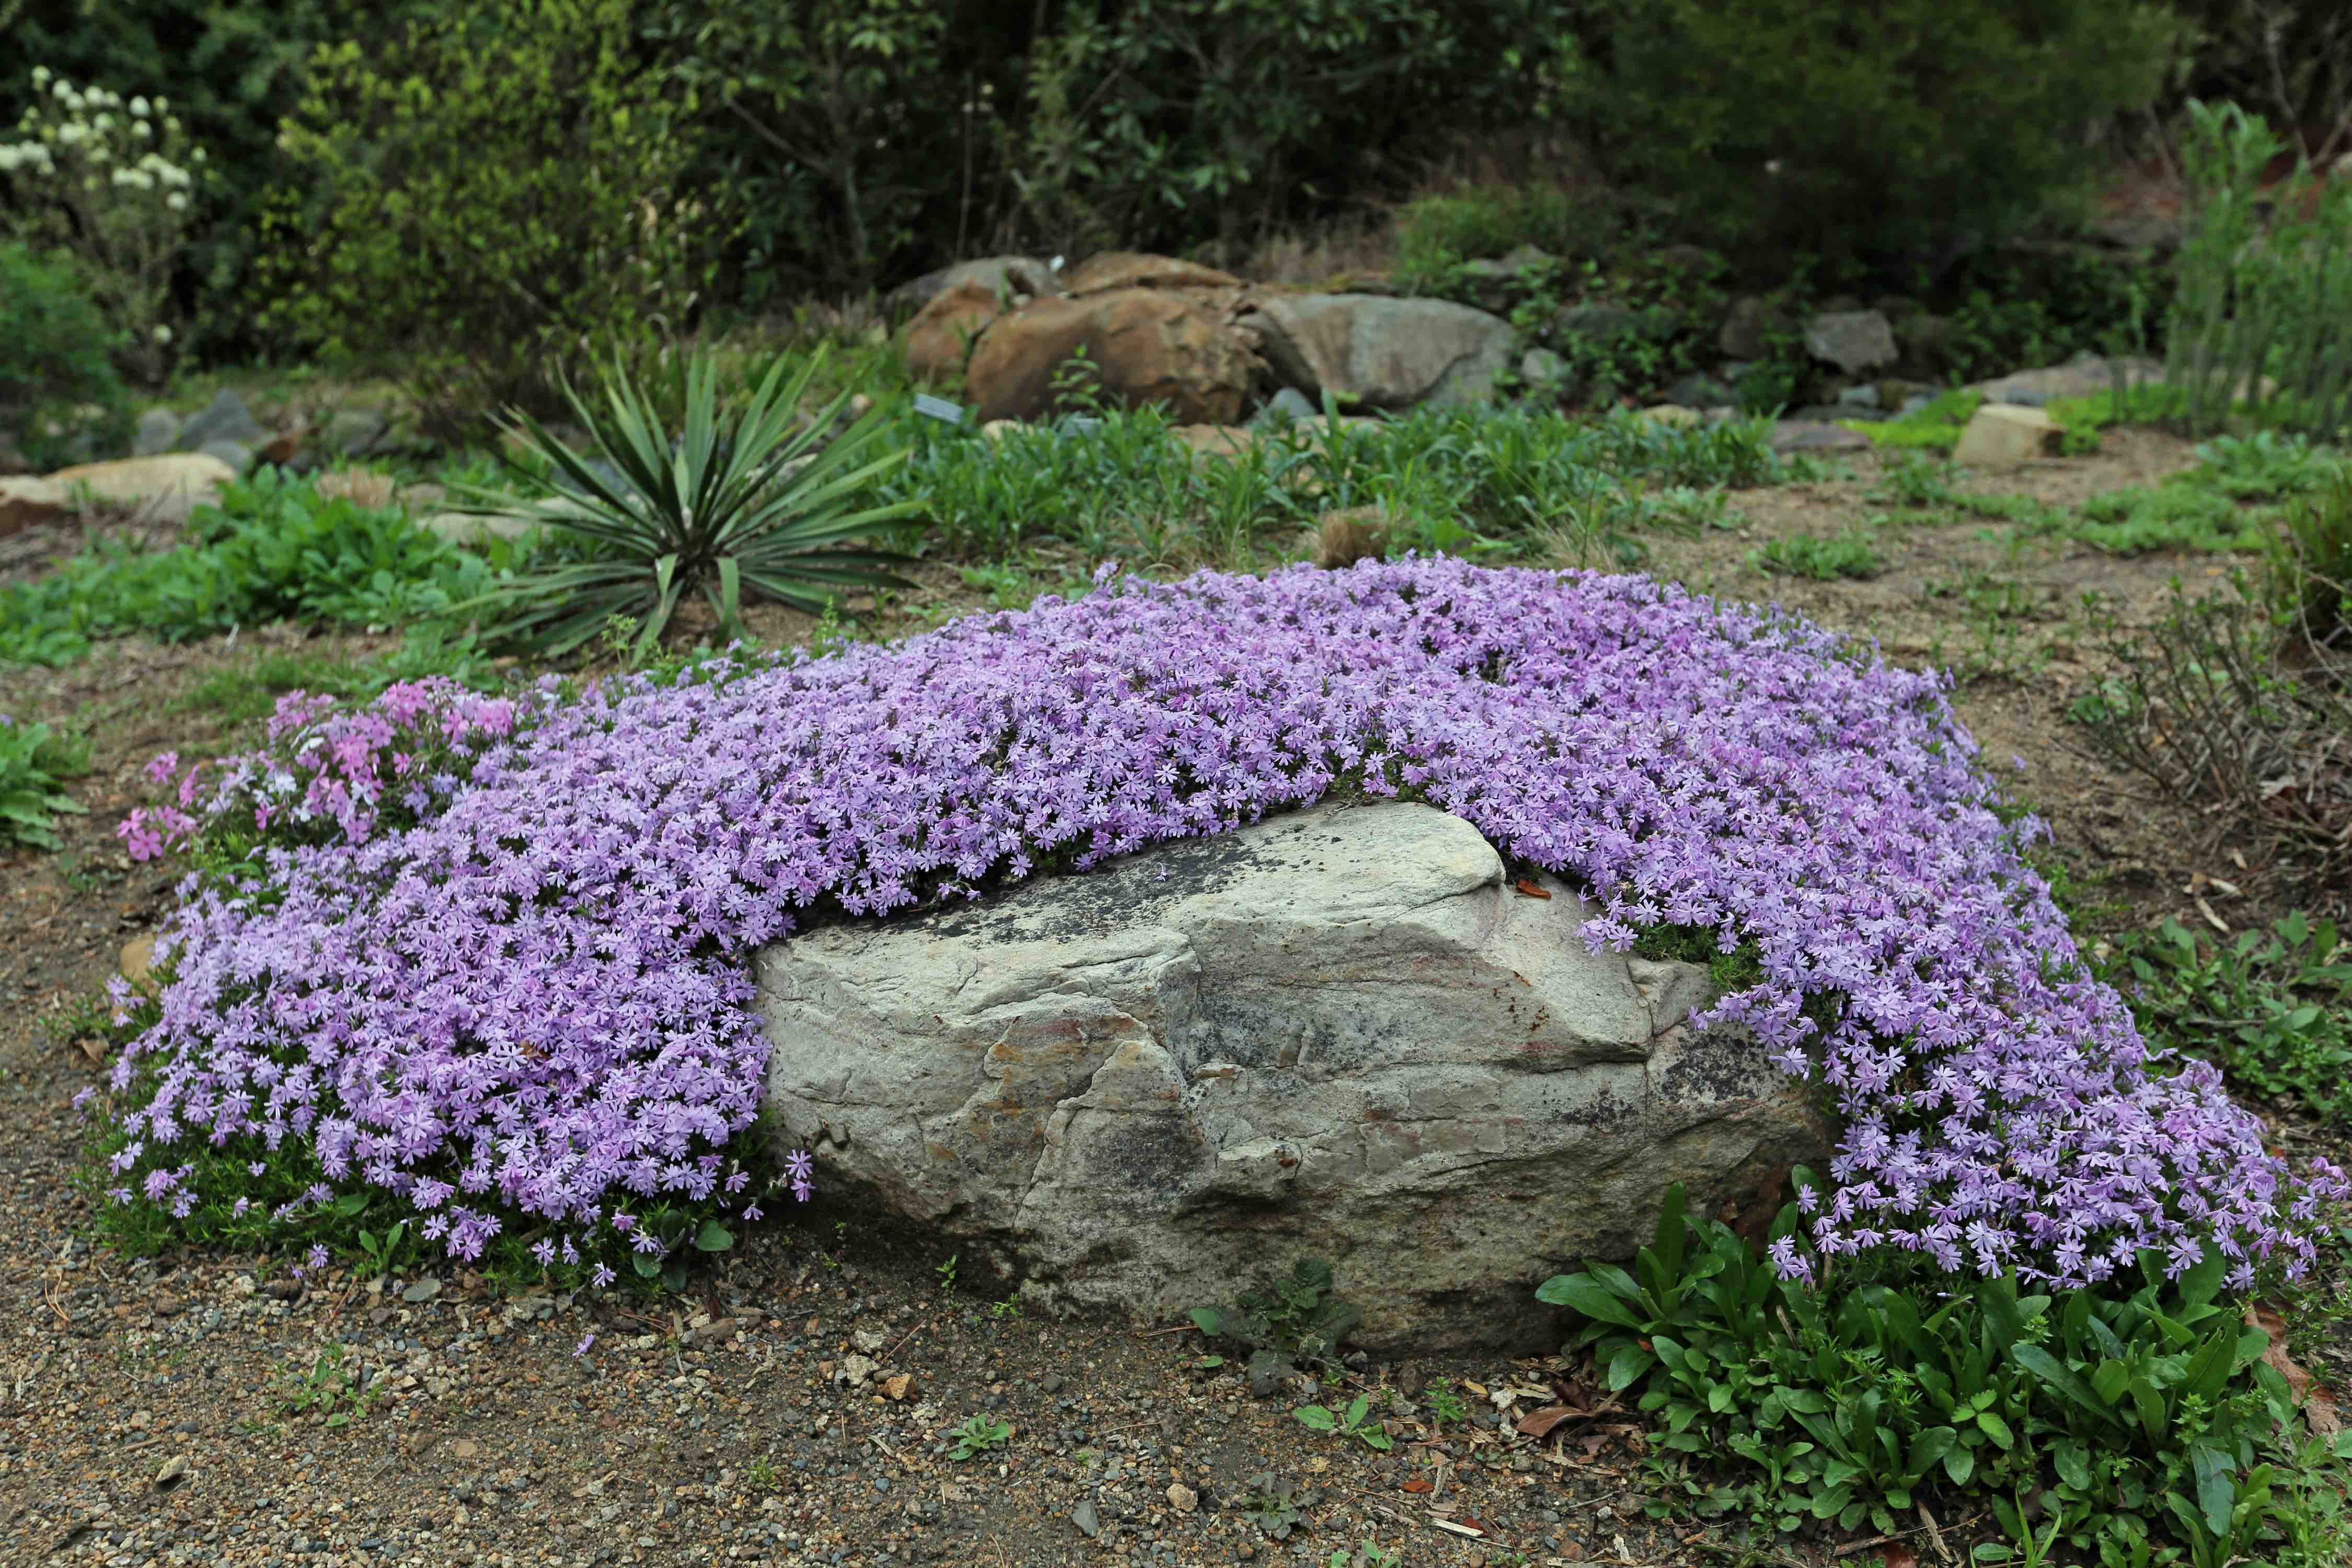 The Scientific Name is Phlox subulata. You will likely hear them called Moss Phlox, Mountain-pink. This picture shows the Phlox subulata in early April in the Mellichamp Terrace at UNC Charlotte Botanical Gardens of Phlox subulata